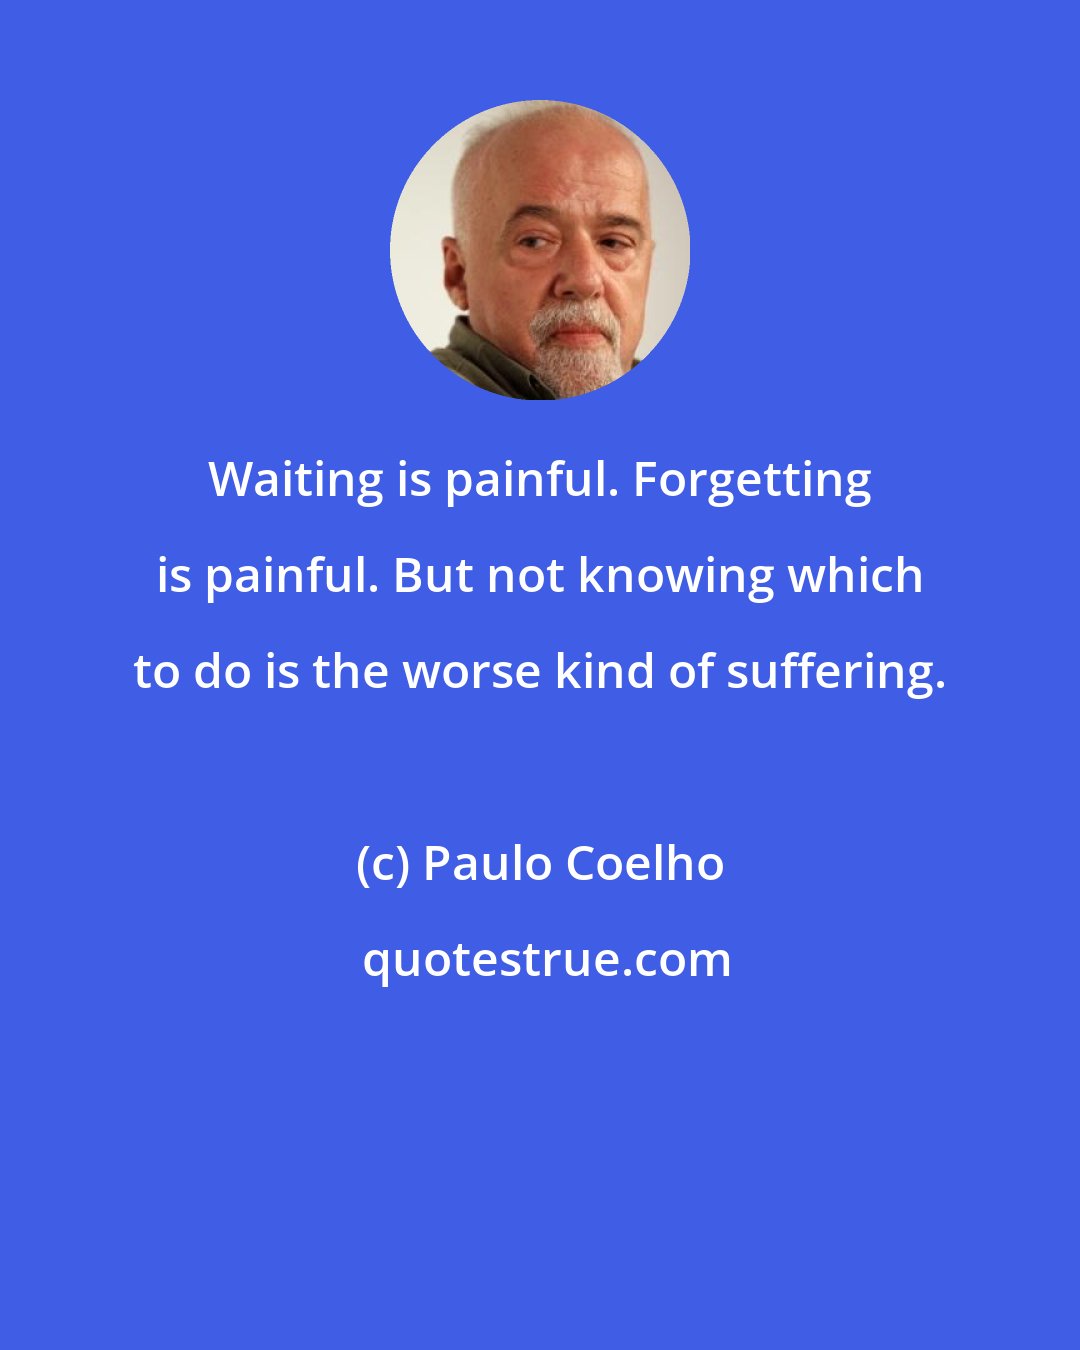 Paulo Coelho: Waiting is painful. Forgetting is painful. But not knowing which to do is the worse kind of suffering.